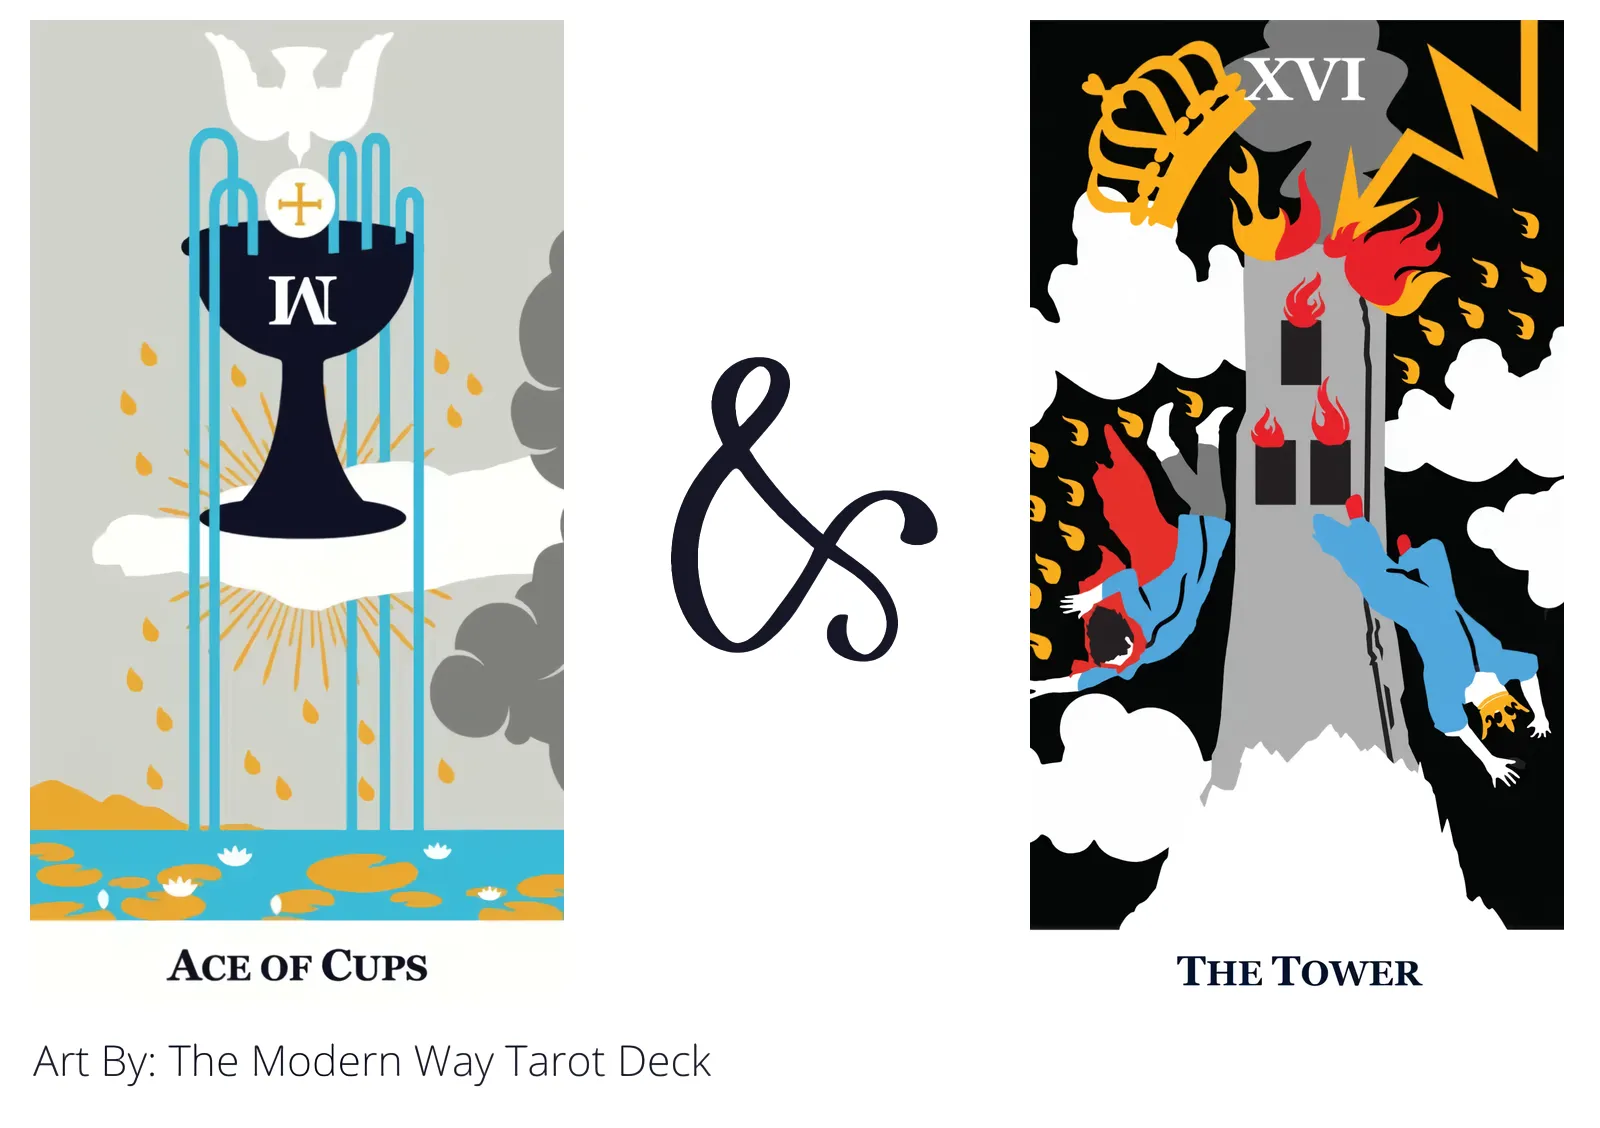 ace of cups and the tower tarot cards together